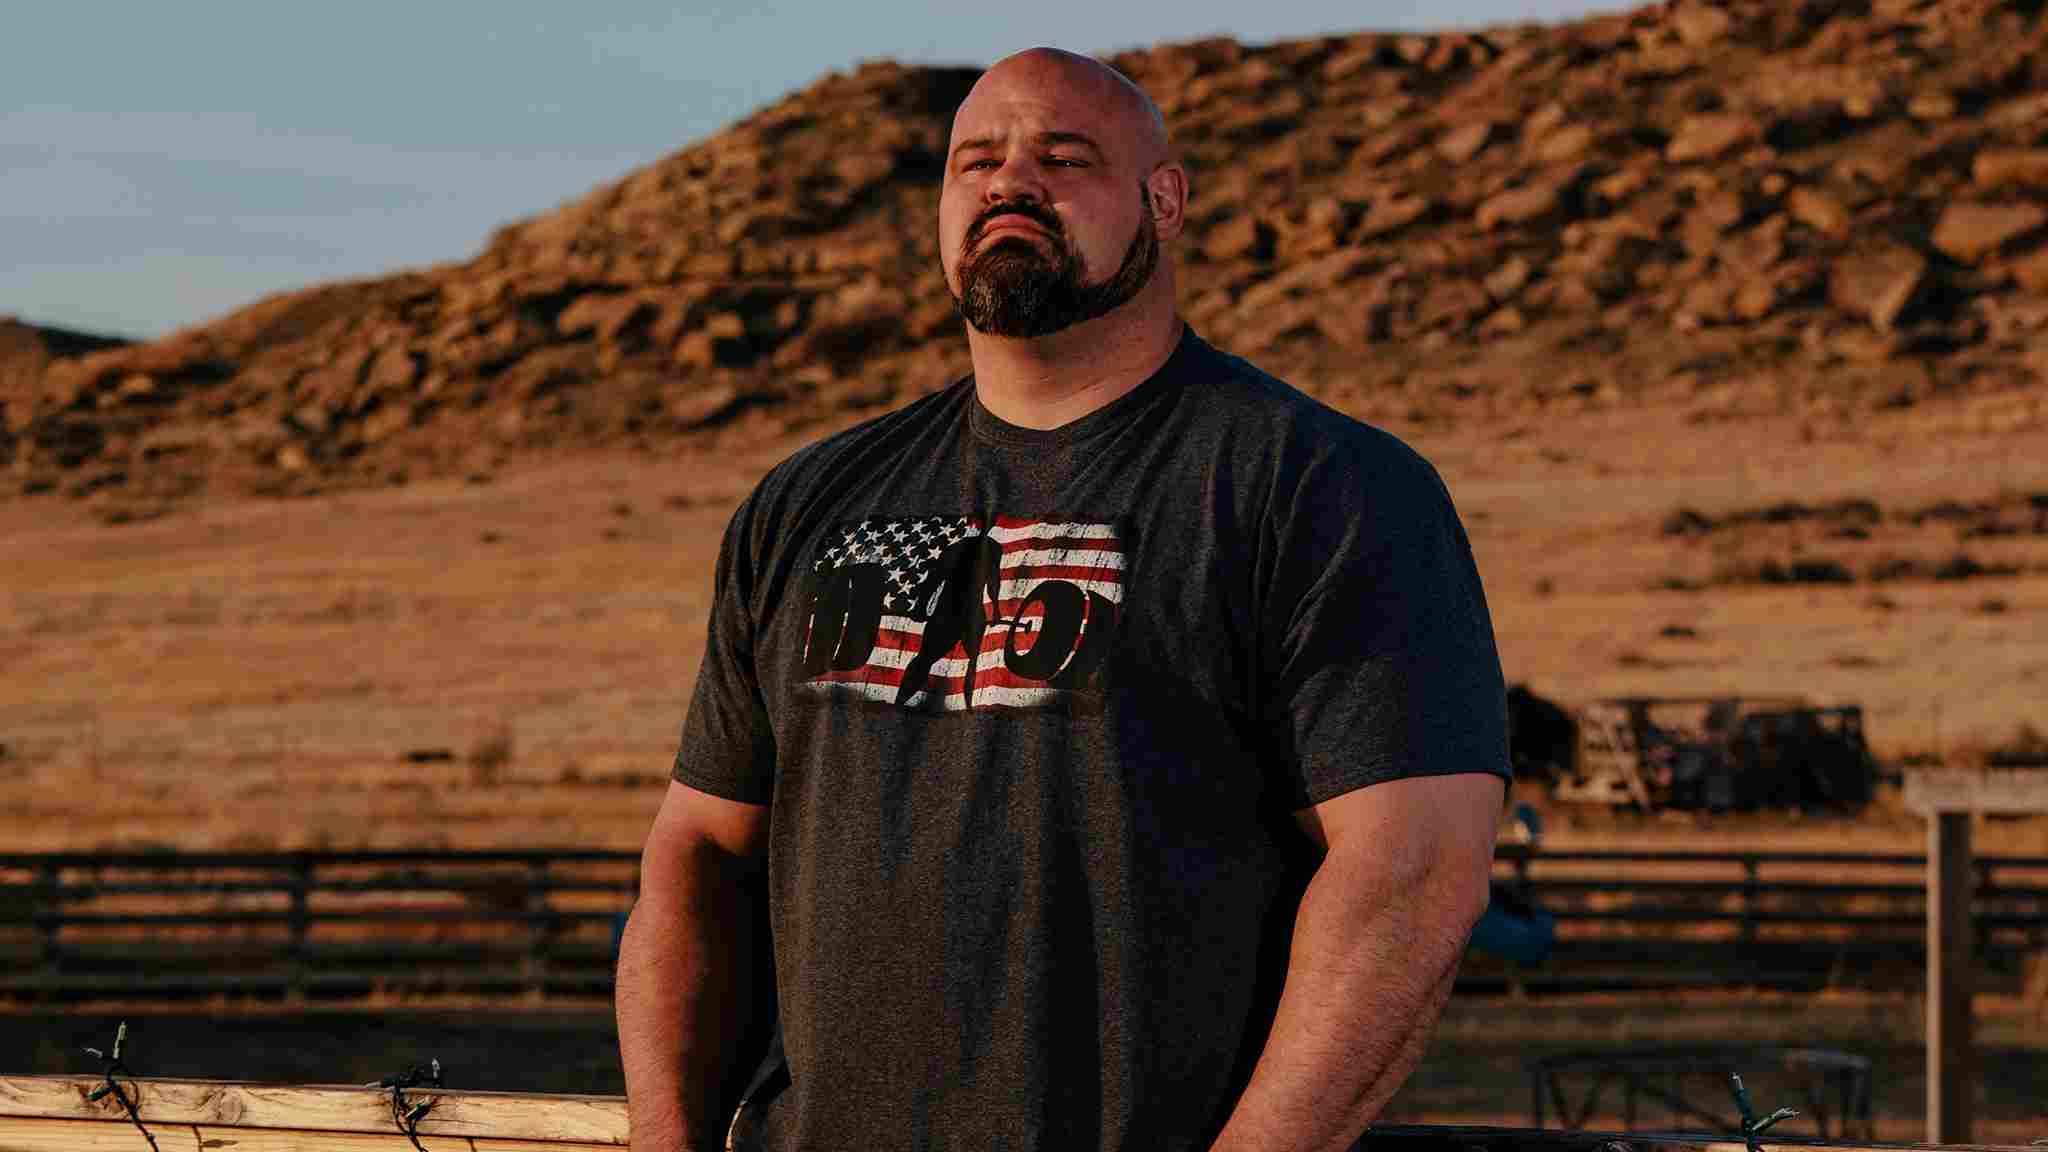 Image of the strongest man in the world, Brian Shaw